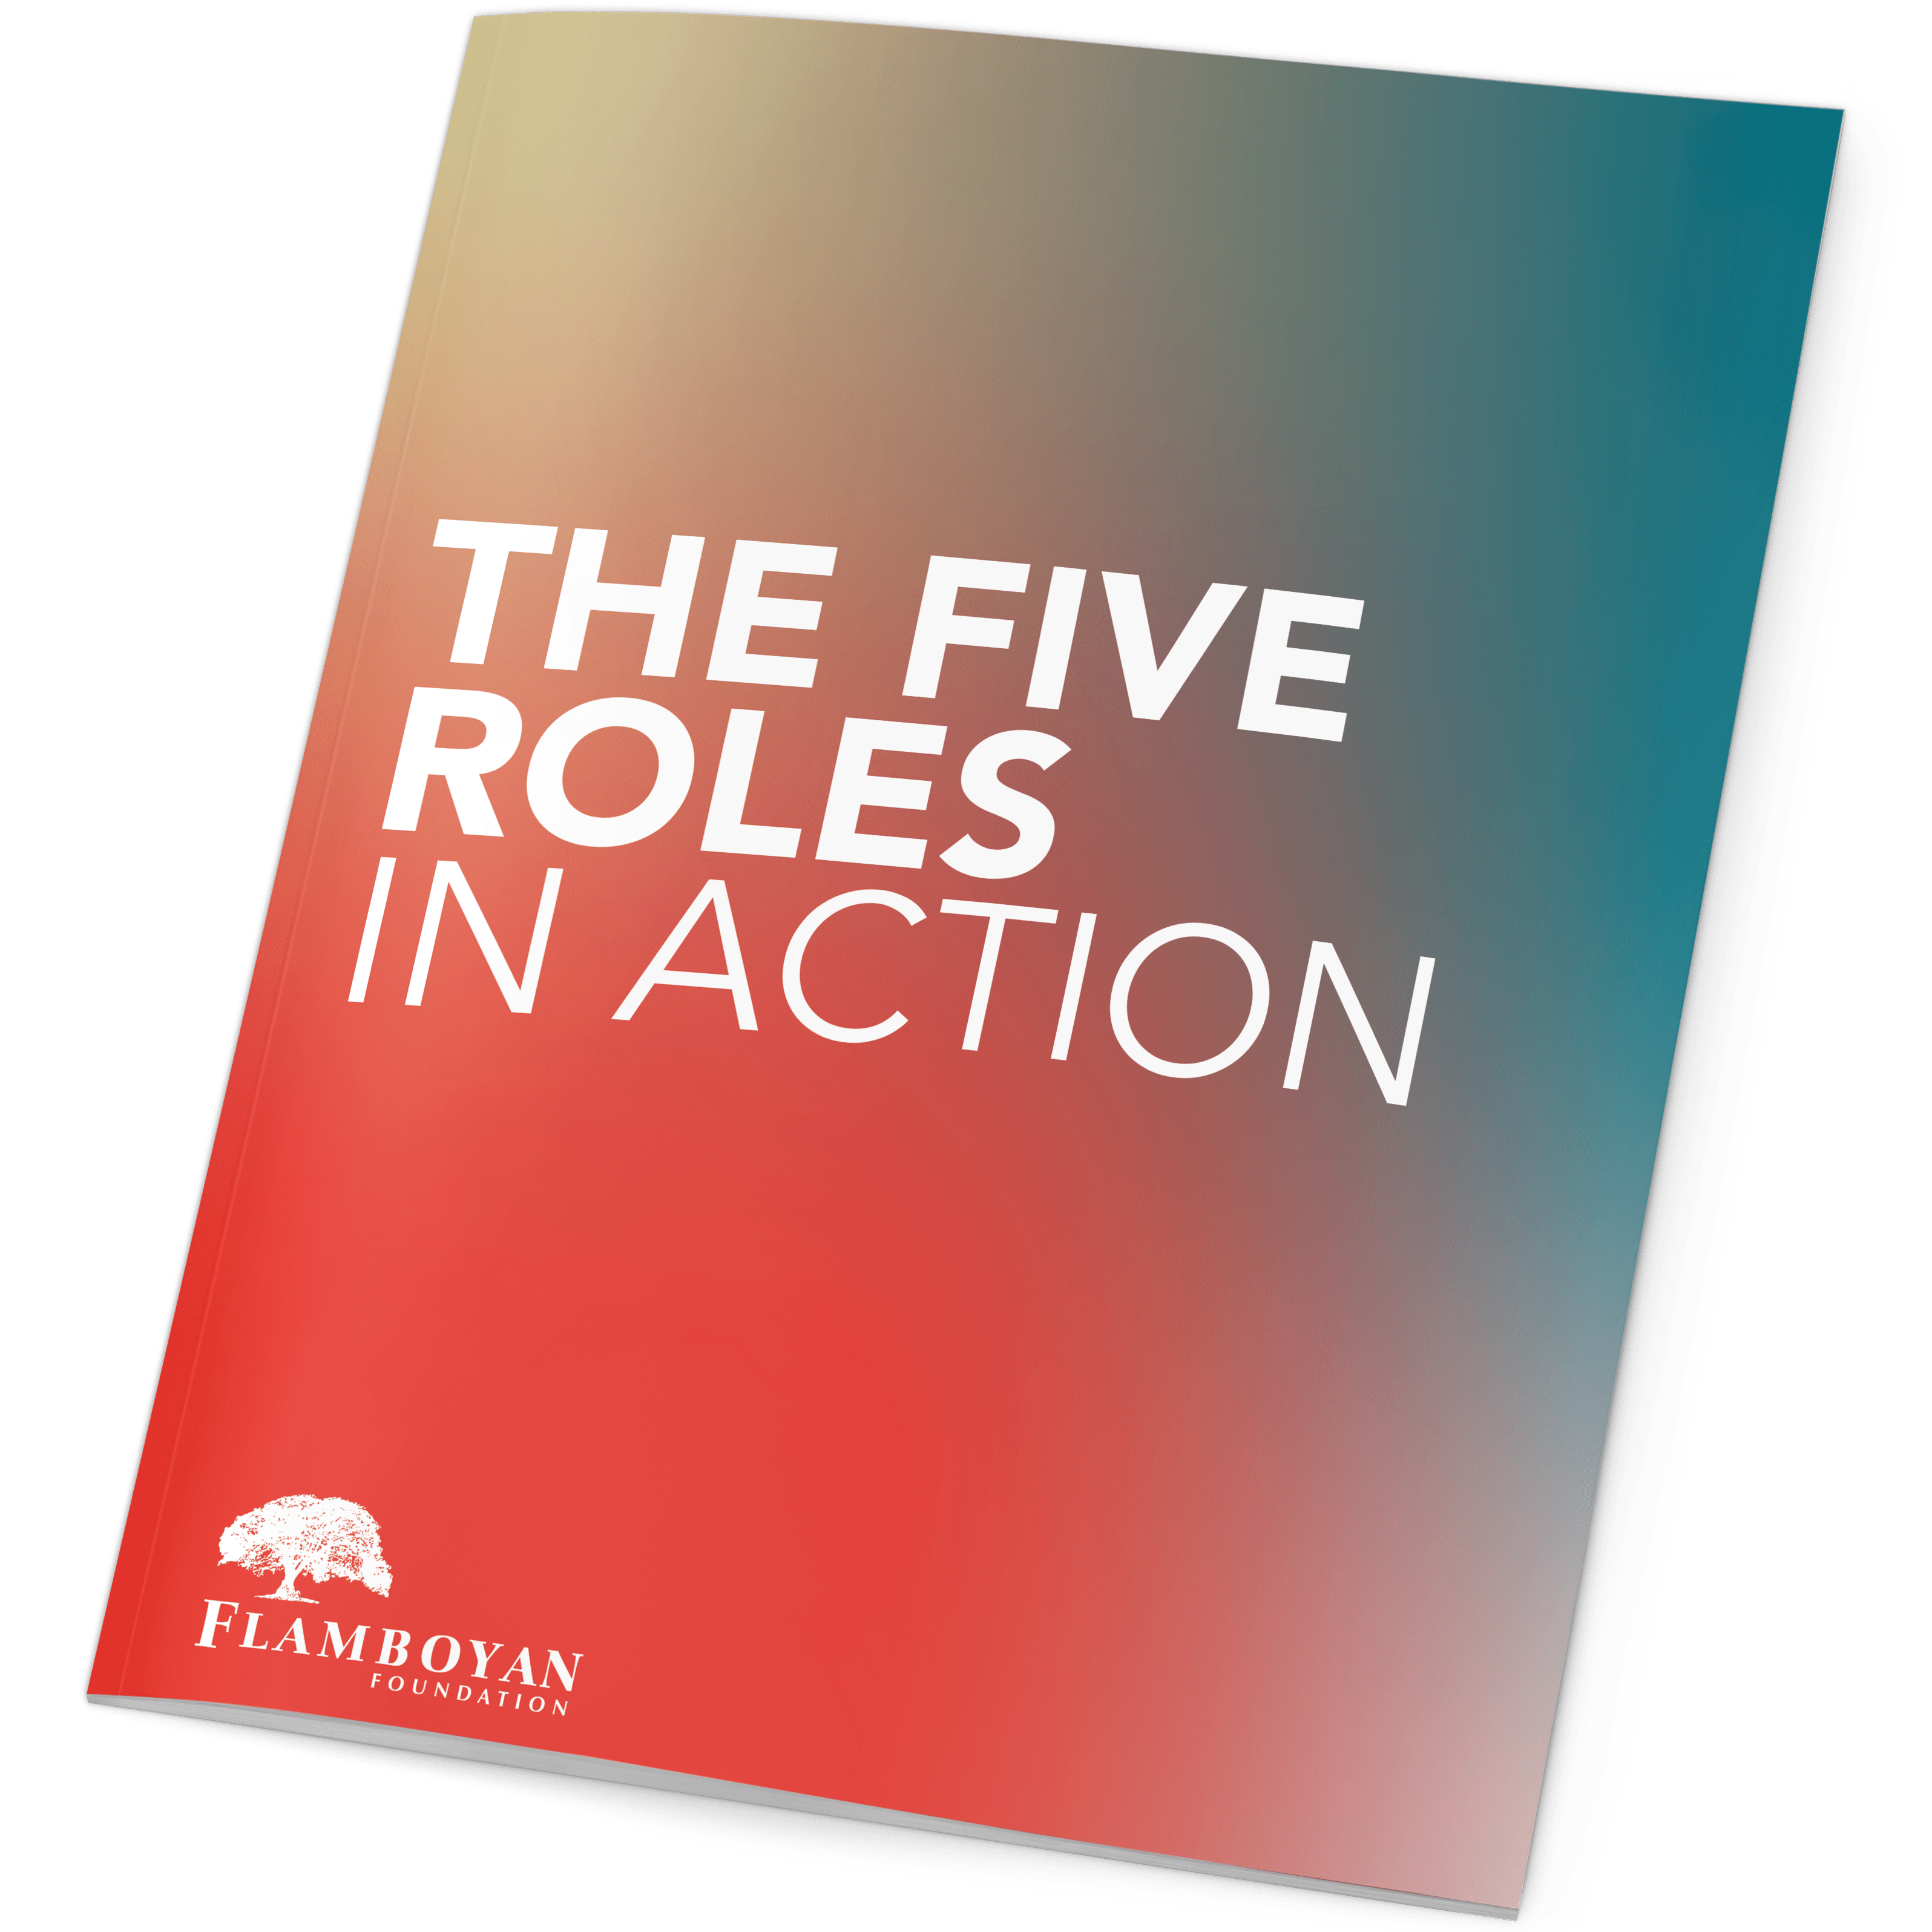 The Five Roles in Action by Flamboyan Foundation